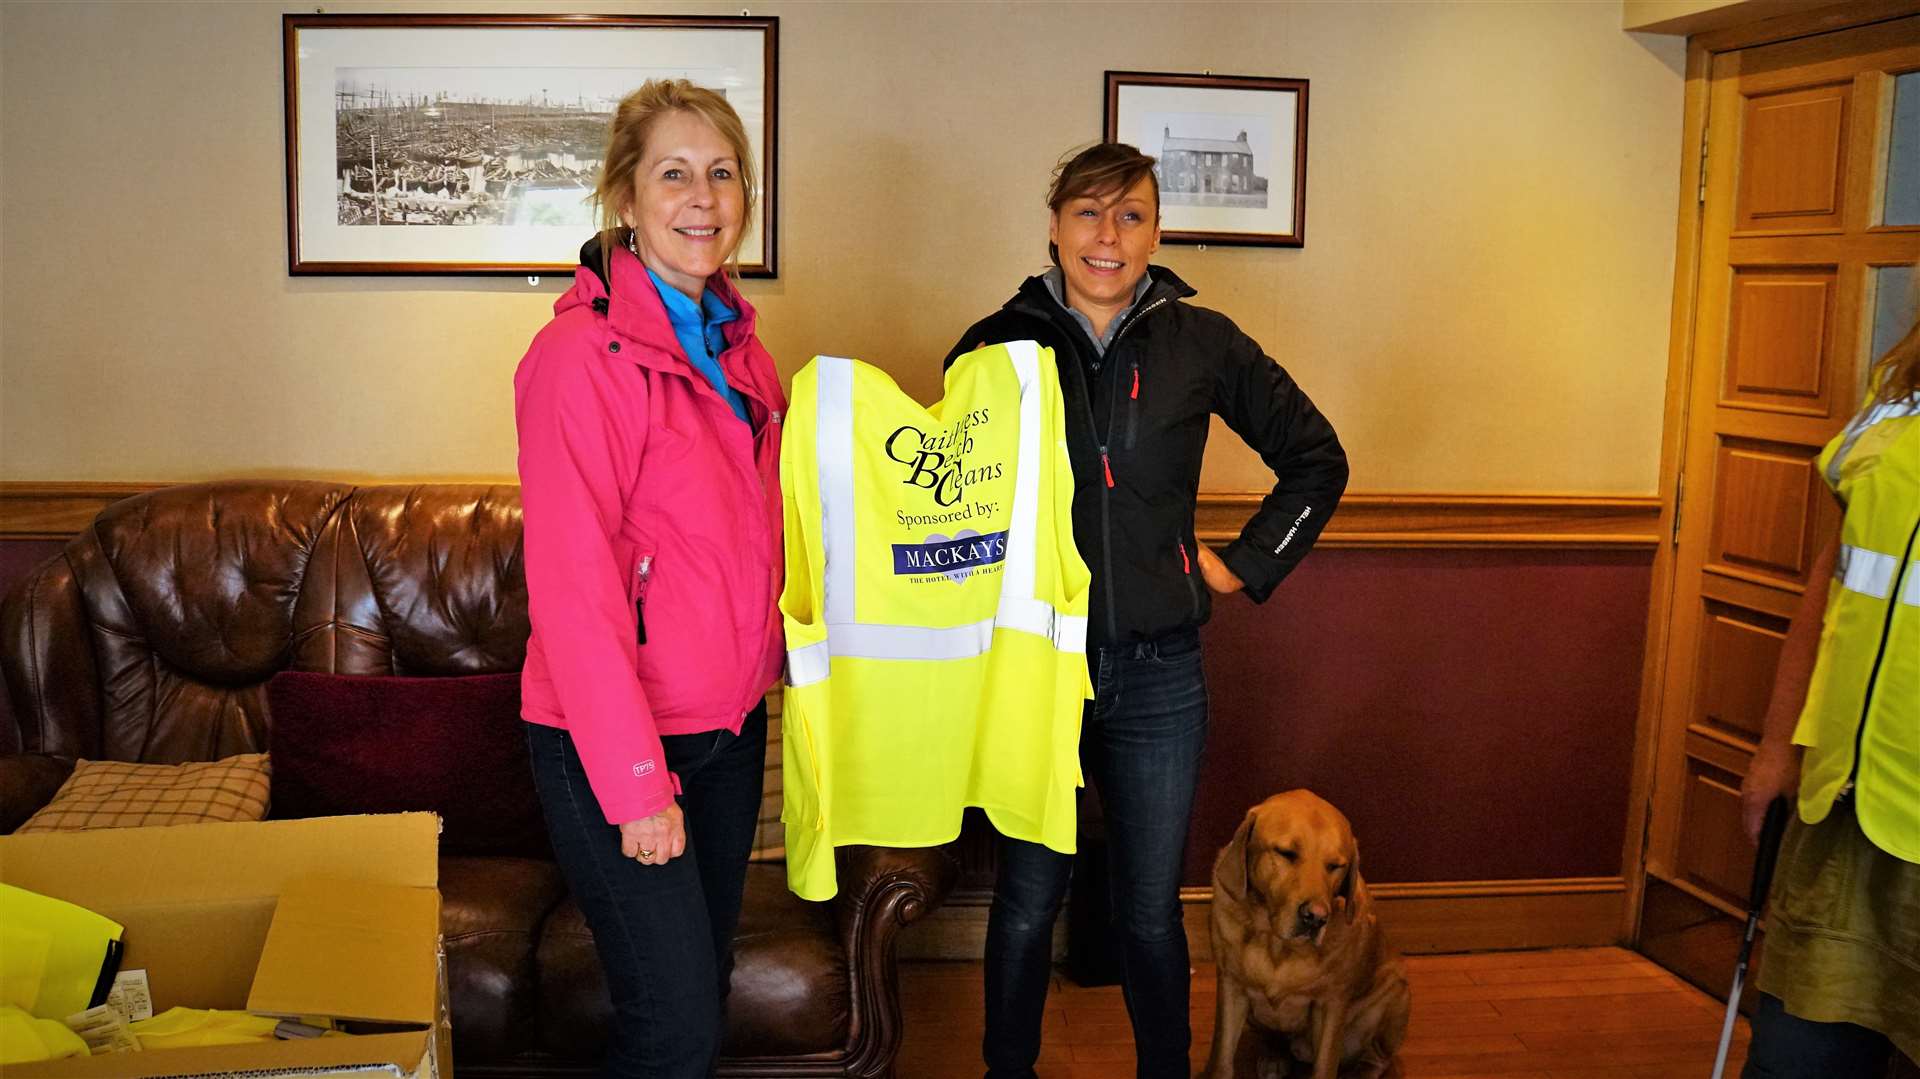 Showing off the new high vis waistcoats are Ellie Lamont (left) with her daughter Jennifer and Max the dog.